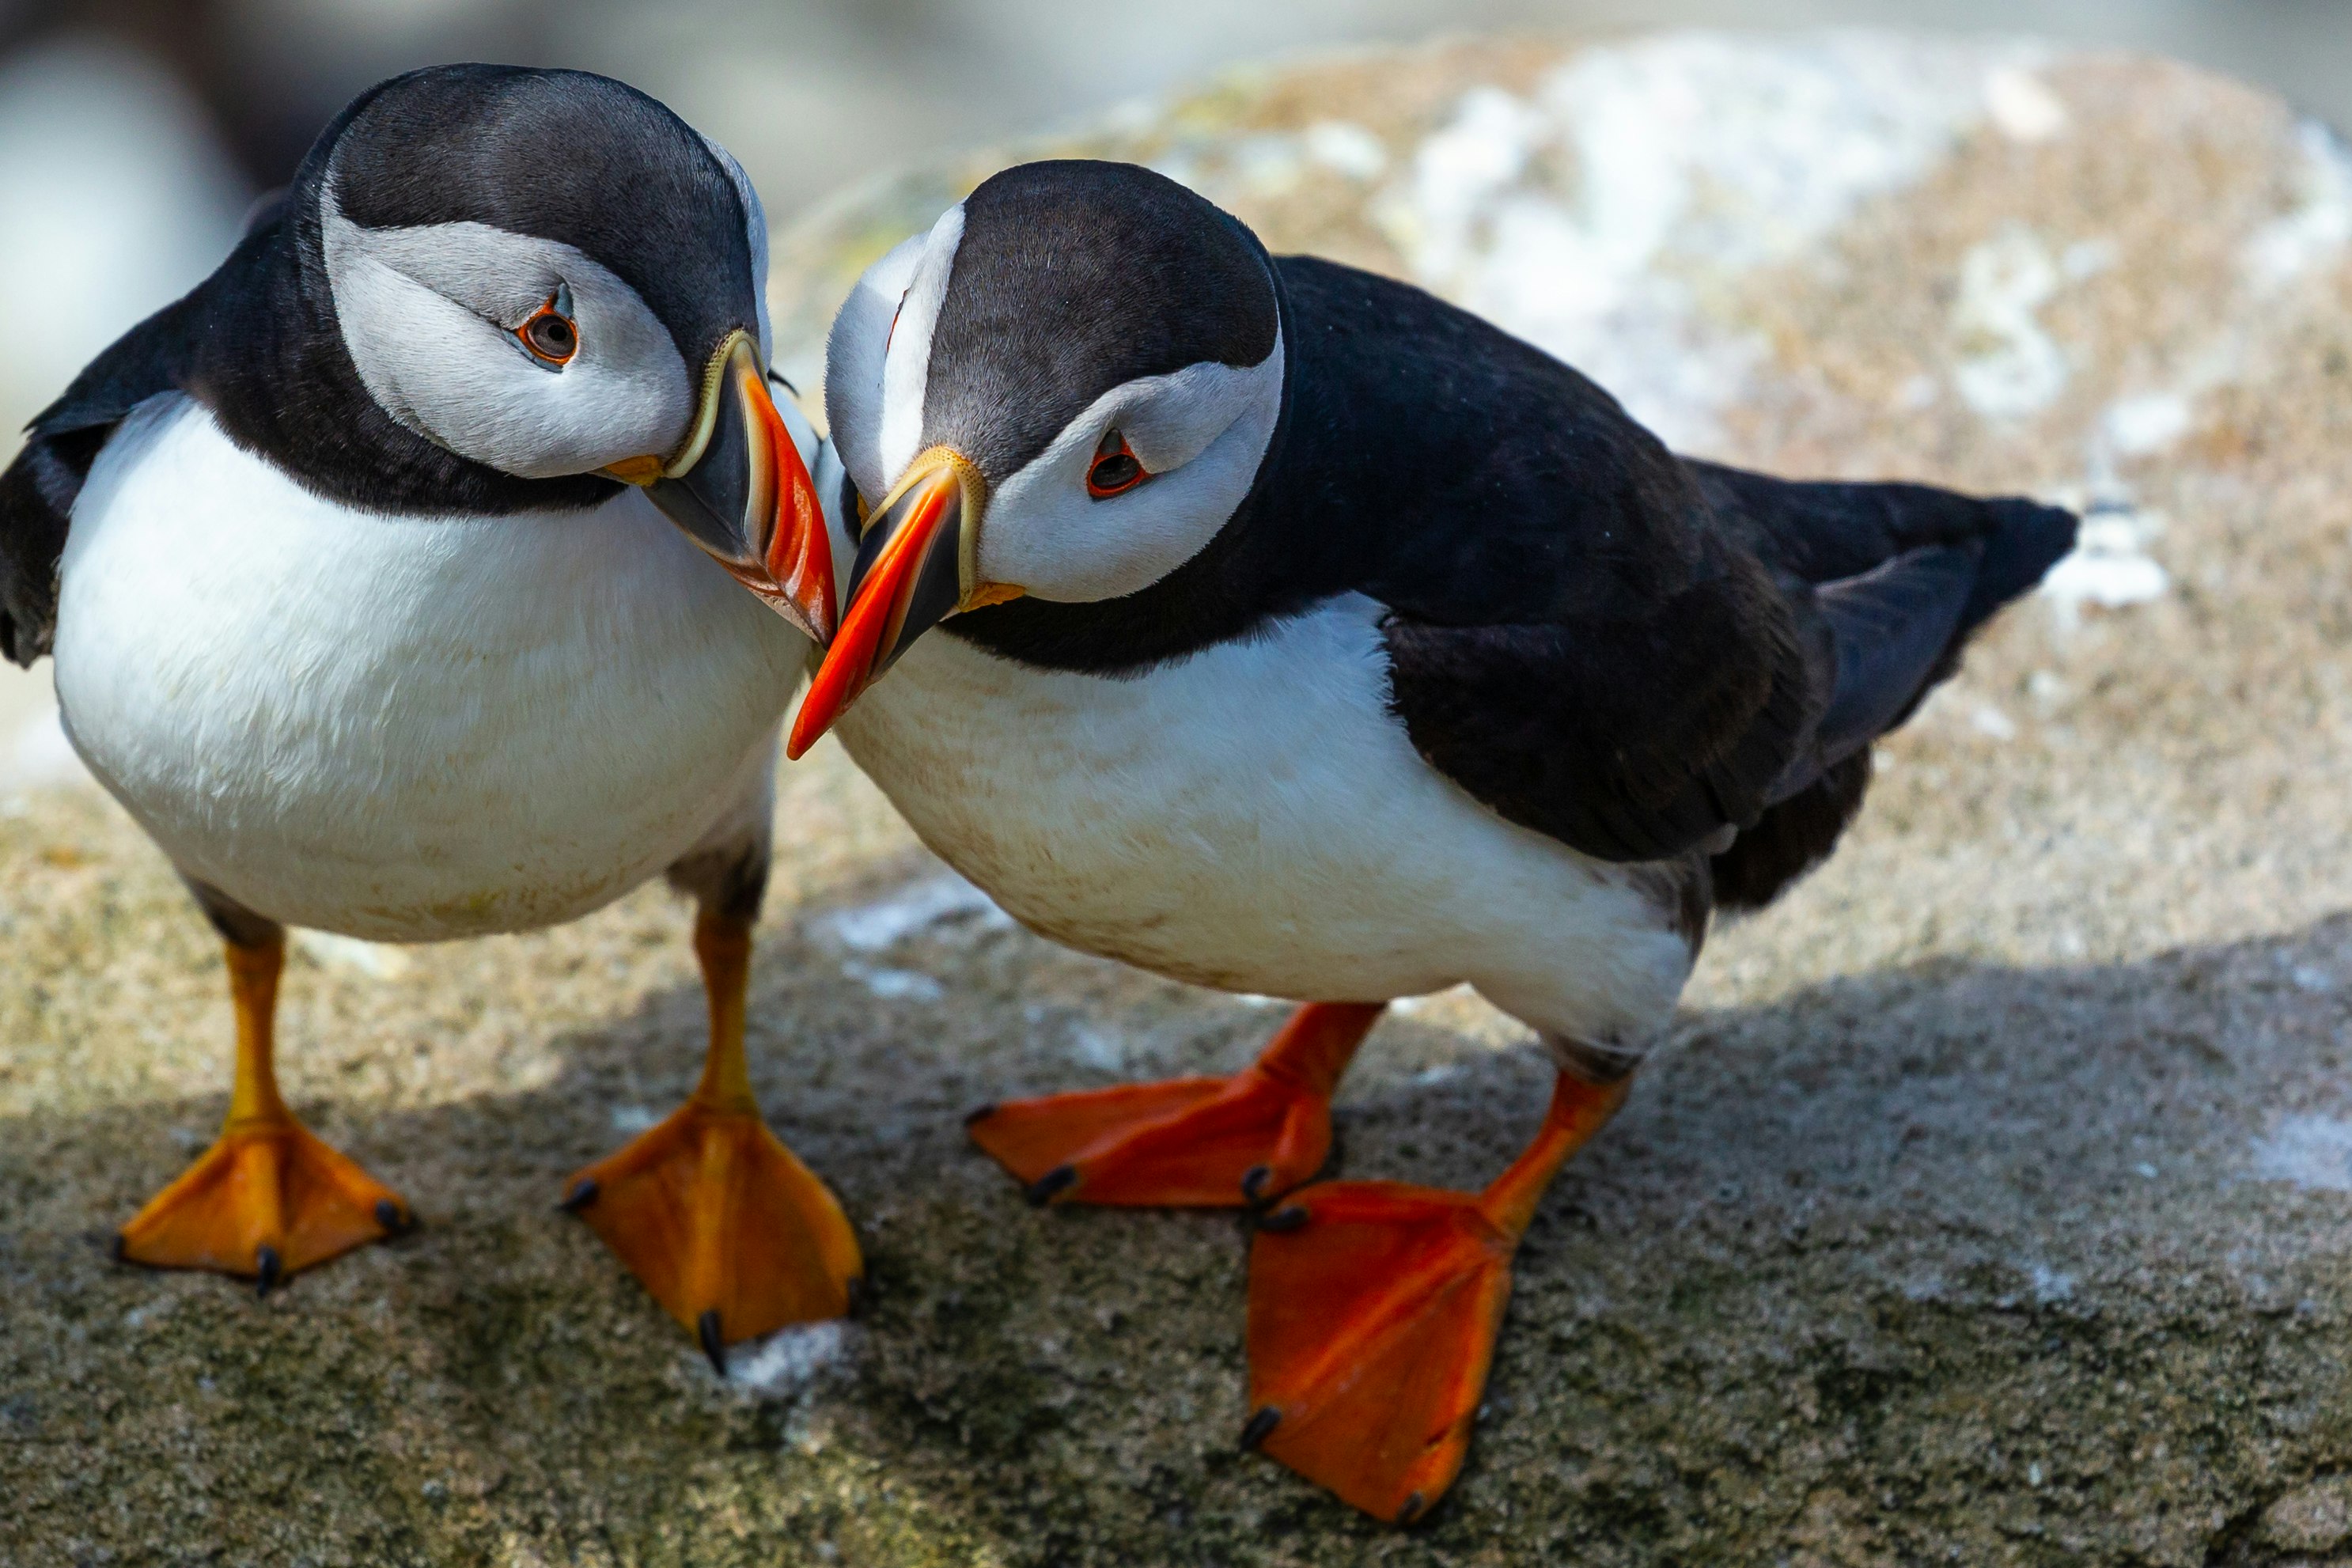 A close up of two puffins with their heads close together, standing on a rock